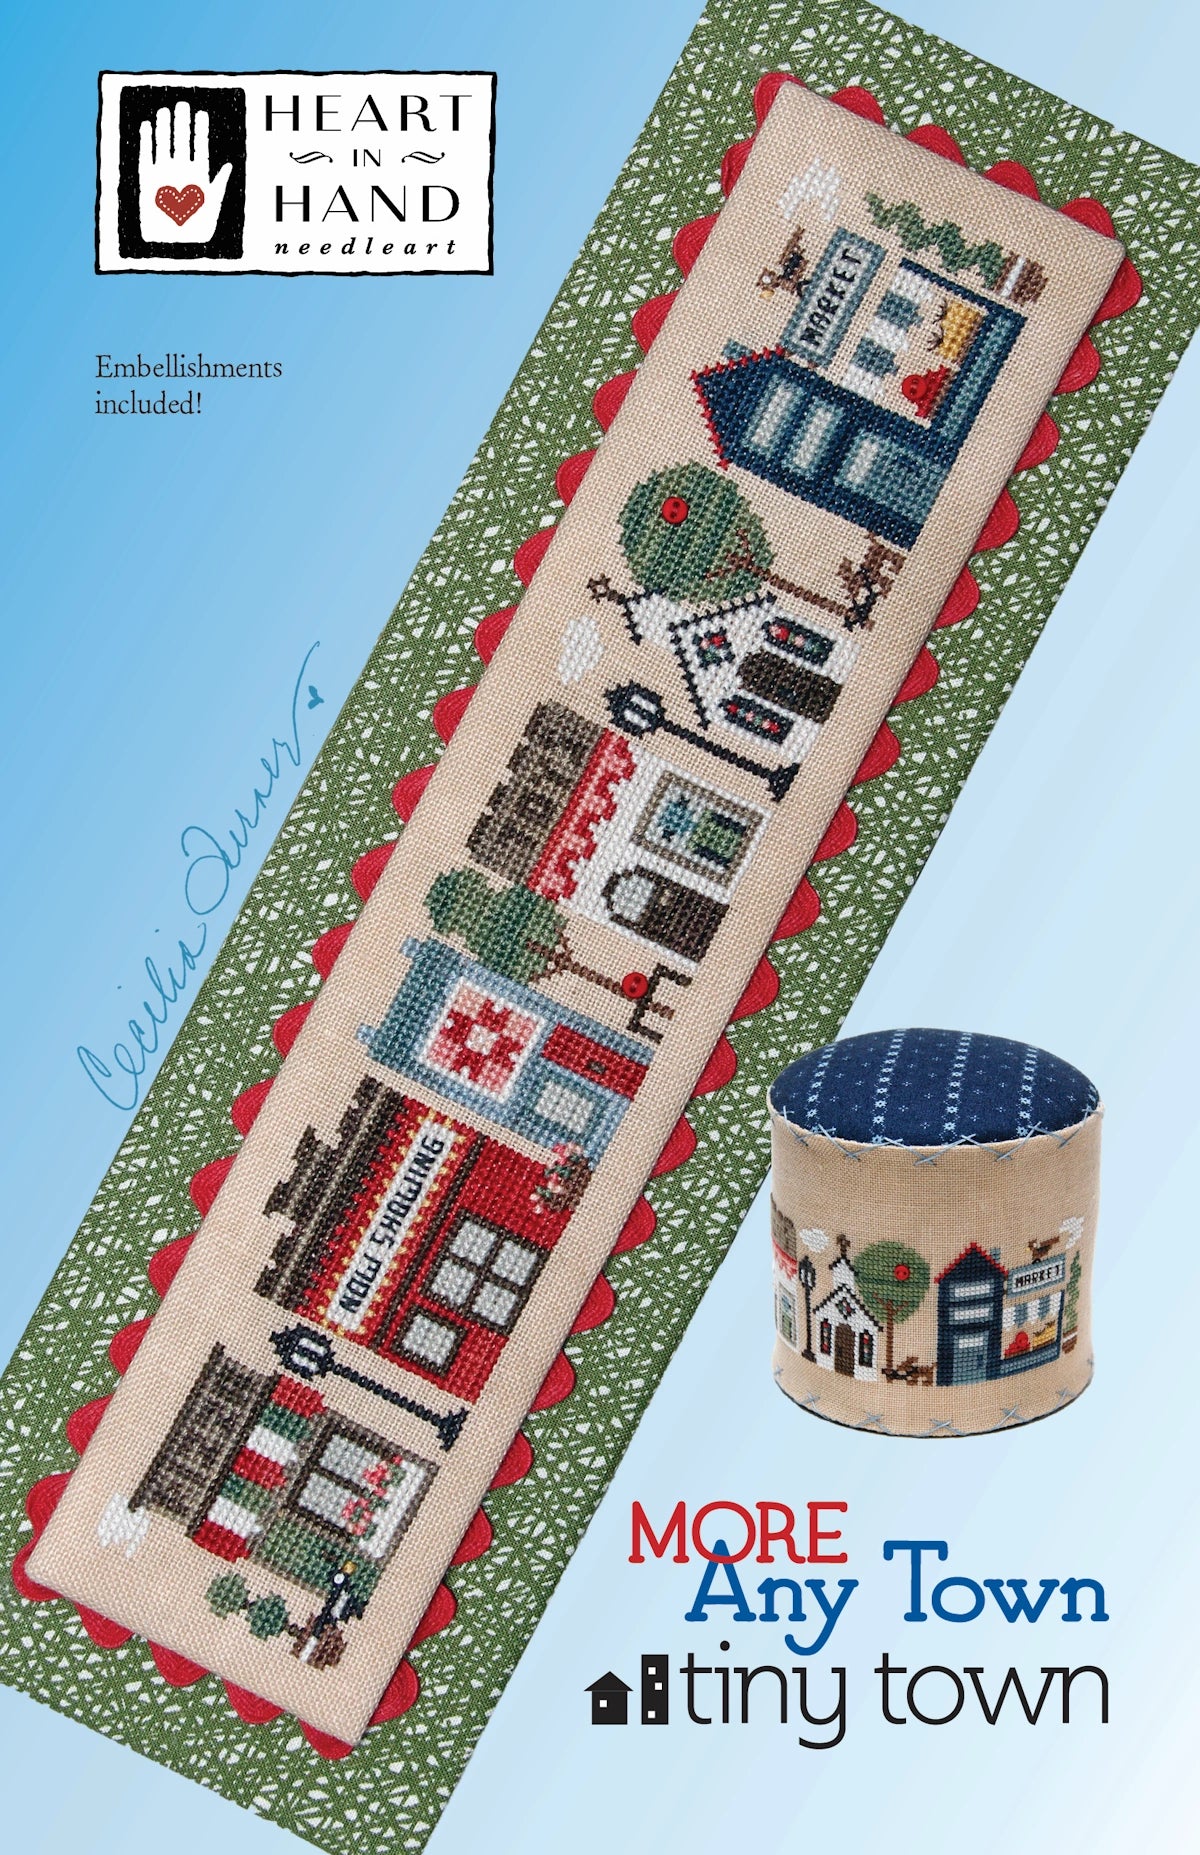 More Any Tiny Town by Heart in Hand Cross Stitch Pattern with Embellishments